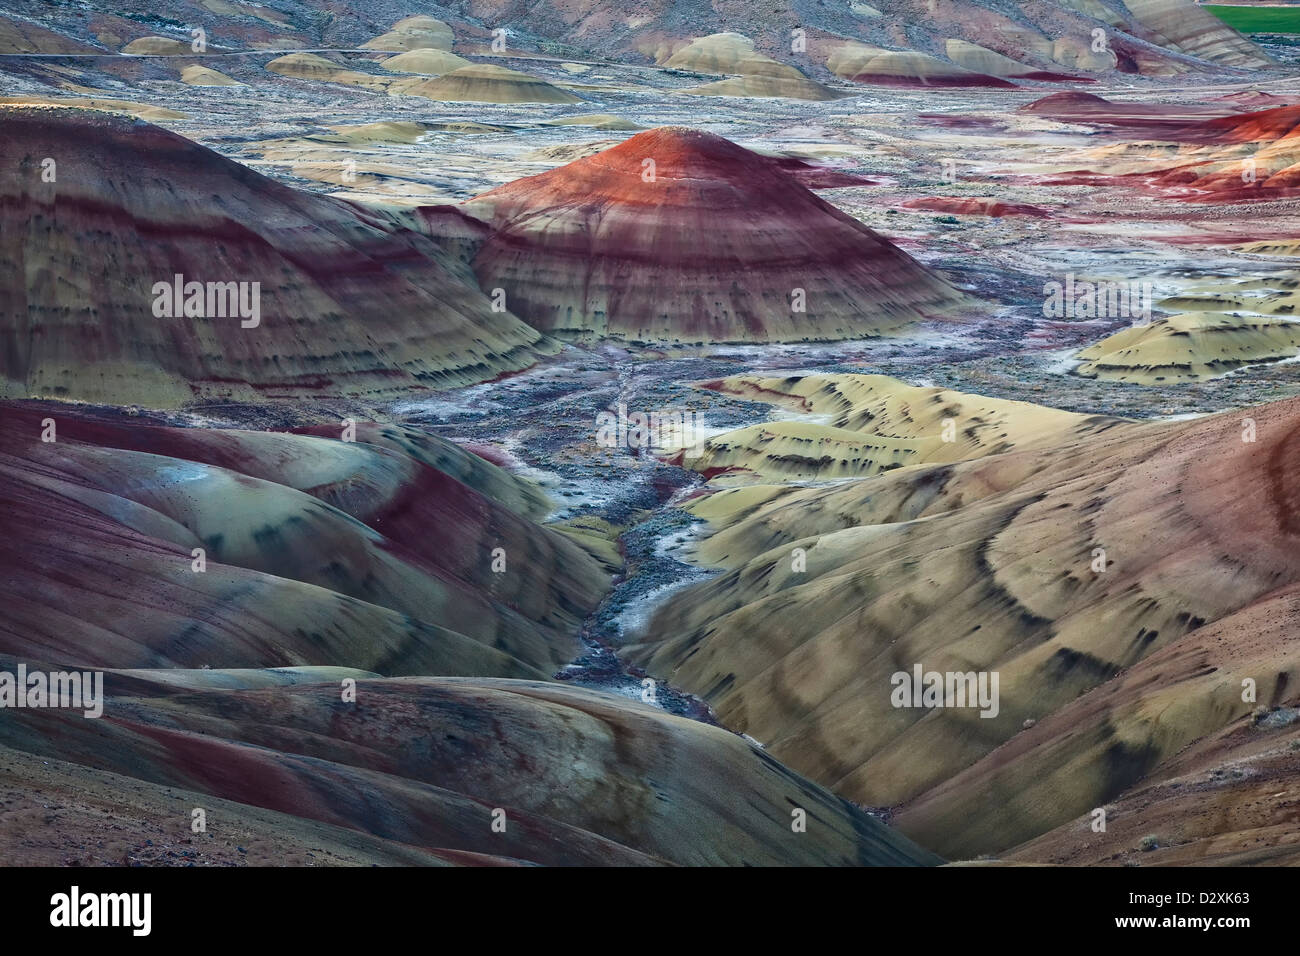 View of Painted Hills in Oregon Stock Photo